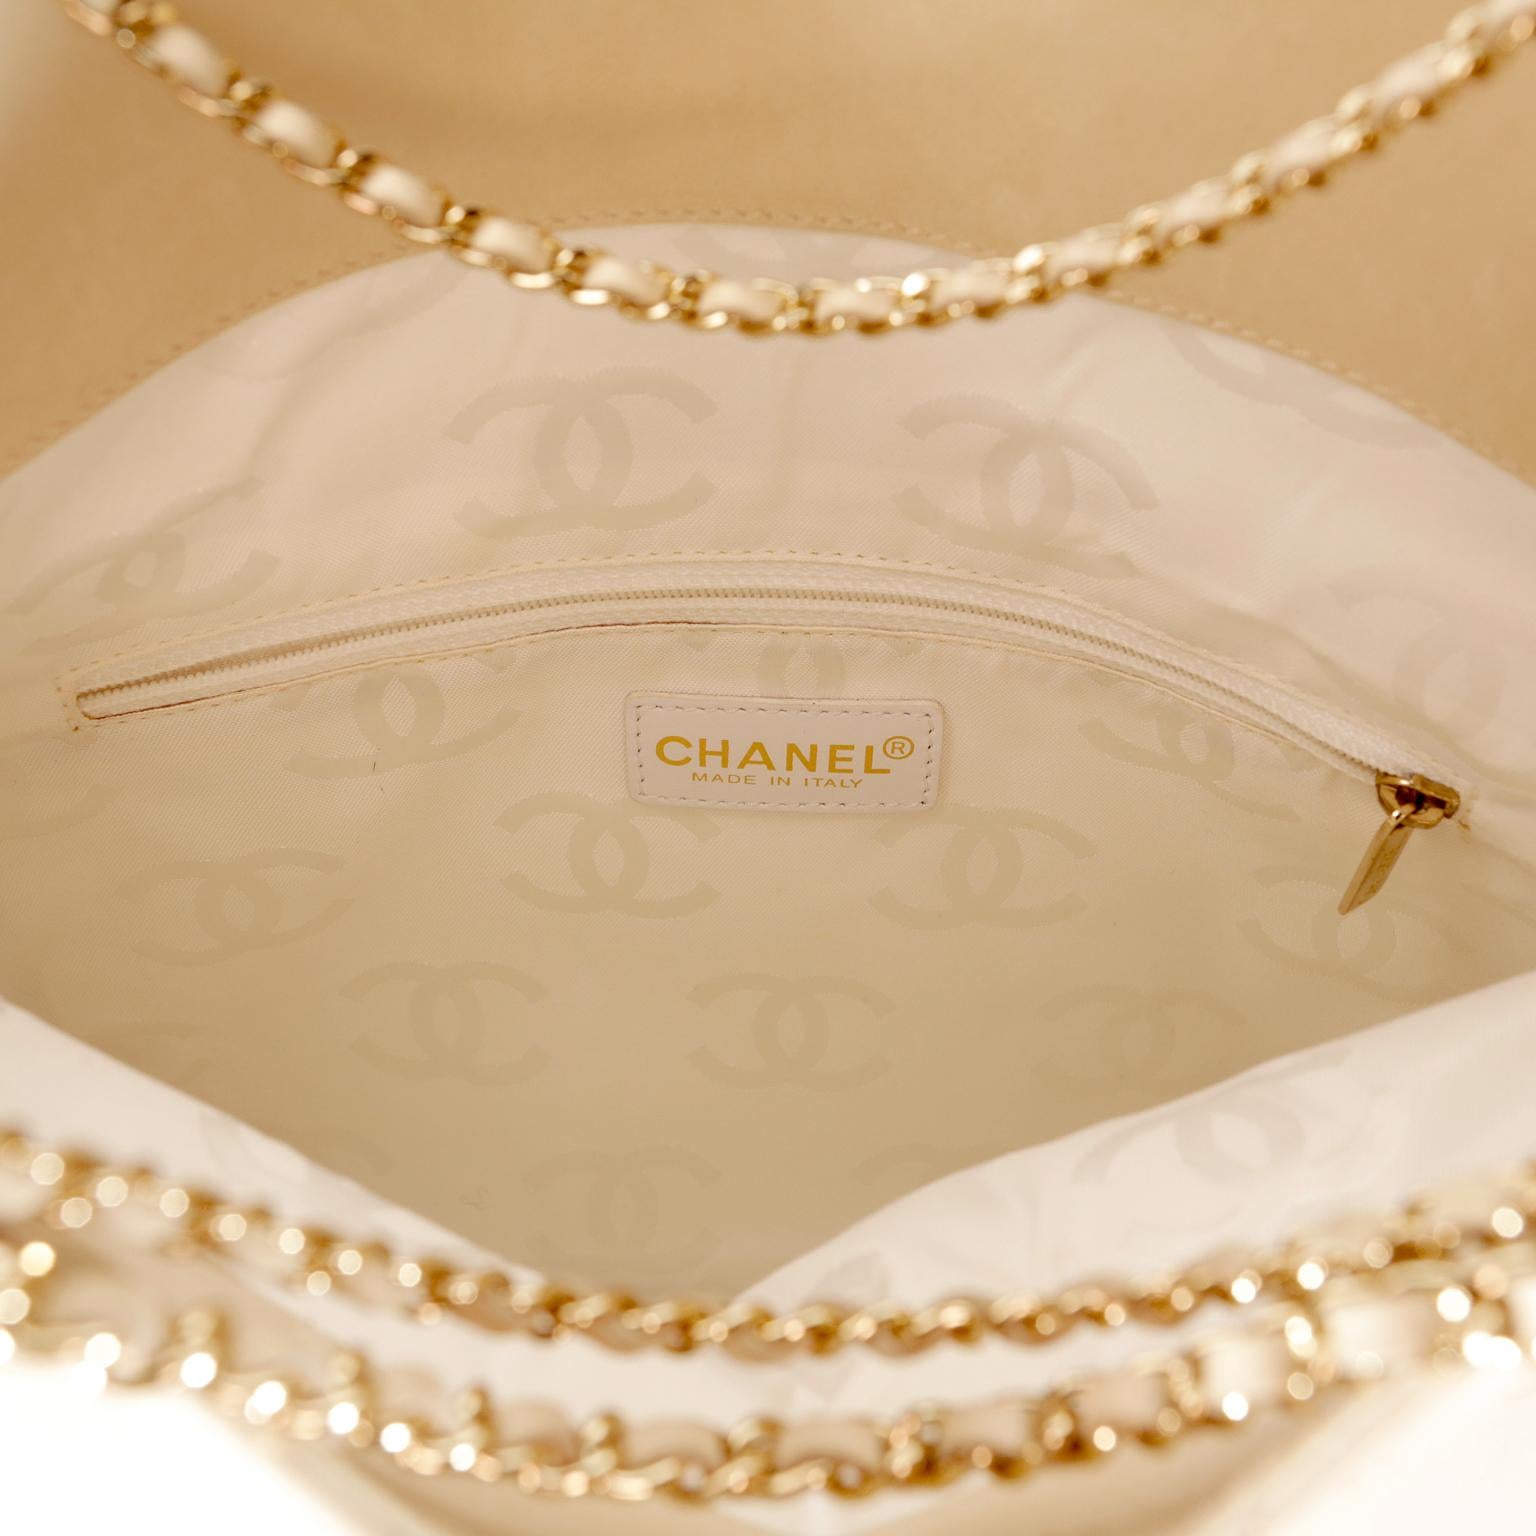 Chanel Beige Leather Multi Chain Convertible Envelope Clutch 5